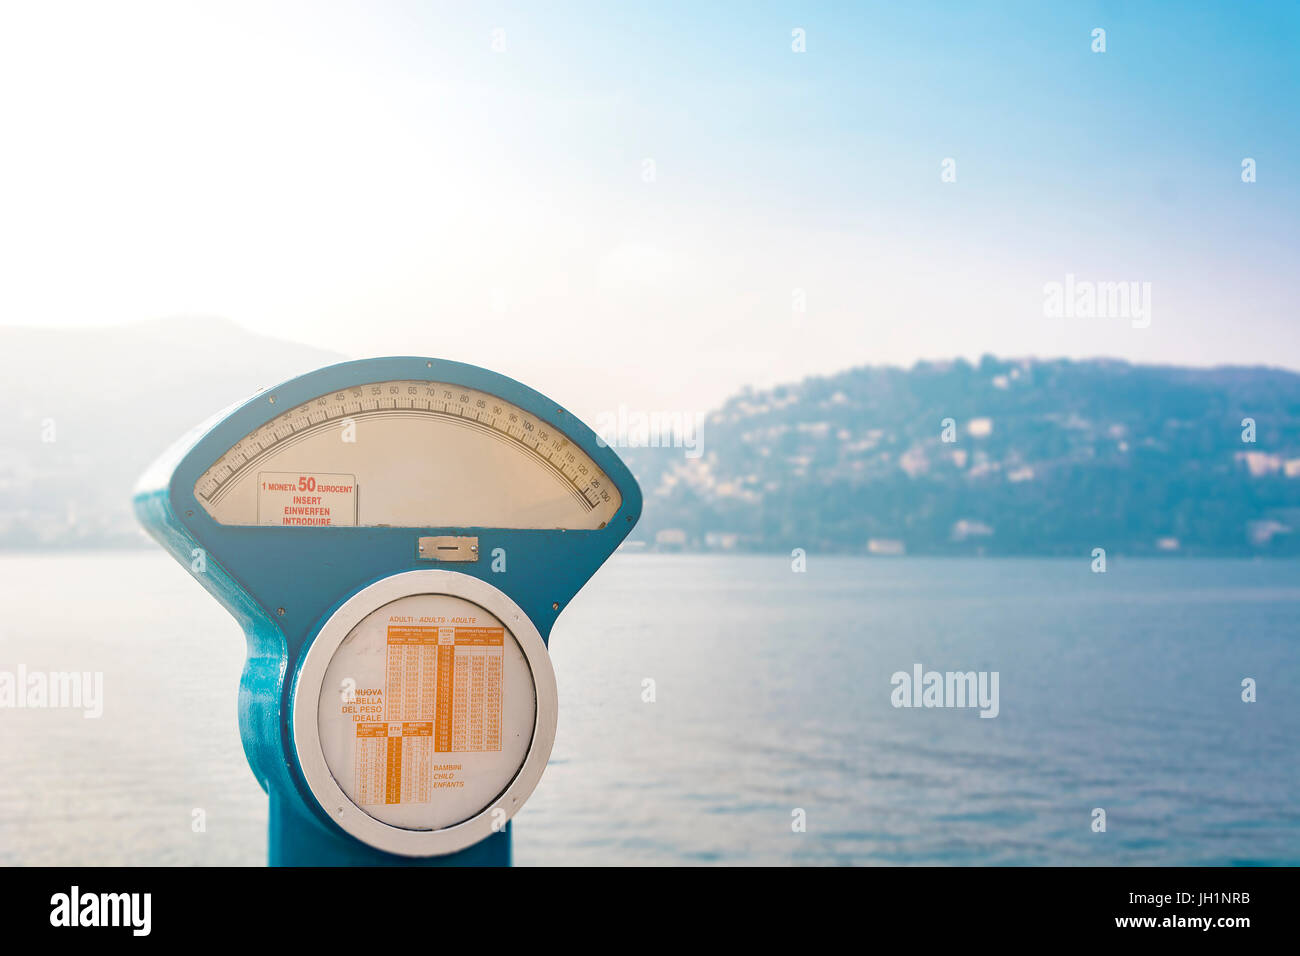 https://c8.alamy.com/comp/JH1NRB/large-analog-scale-with-the-lake-of-como-in-the-background-JH1NRB.jpg